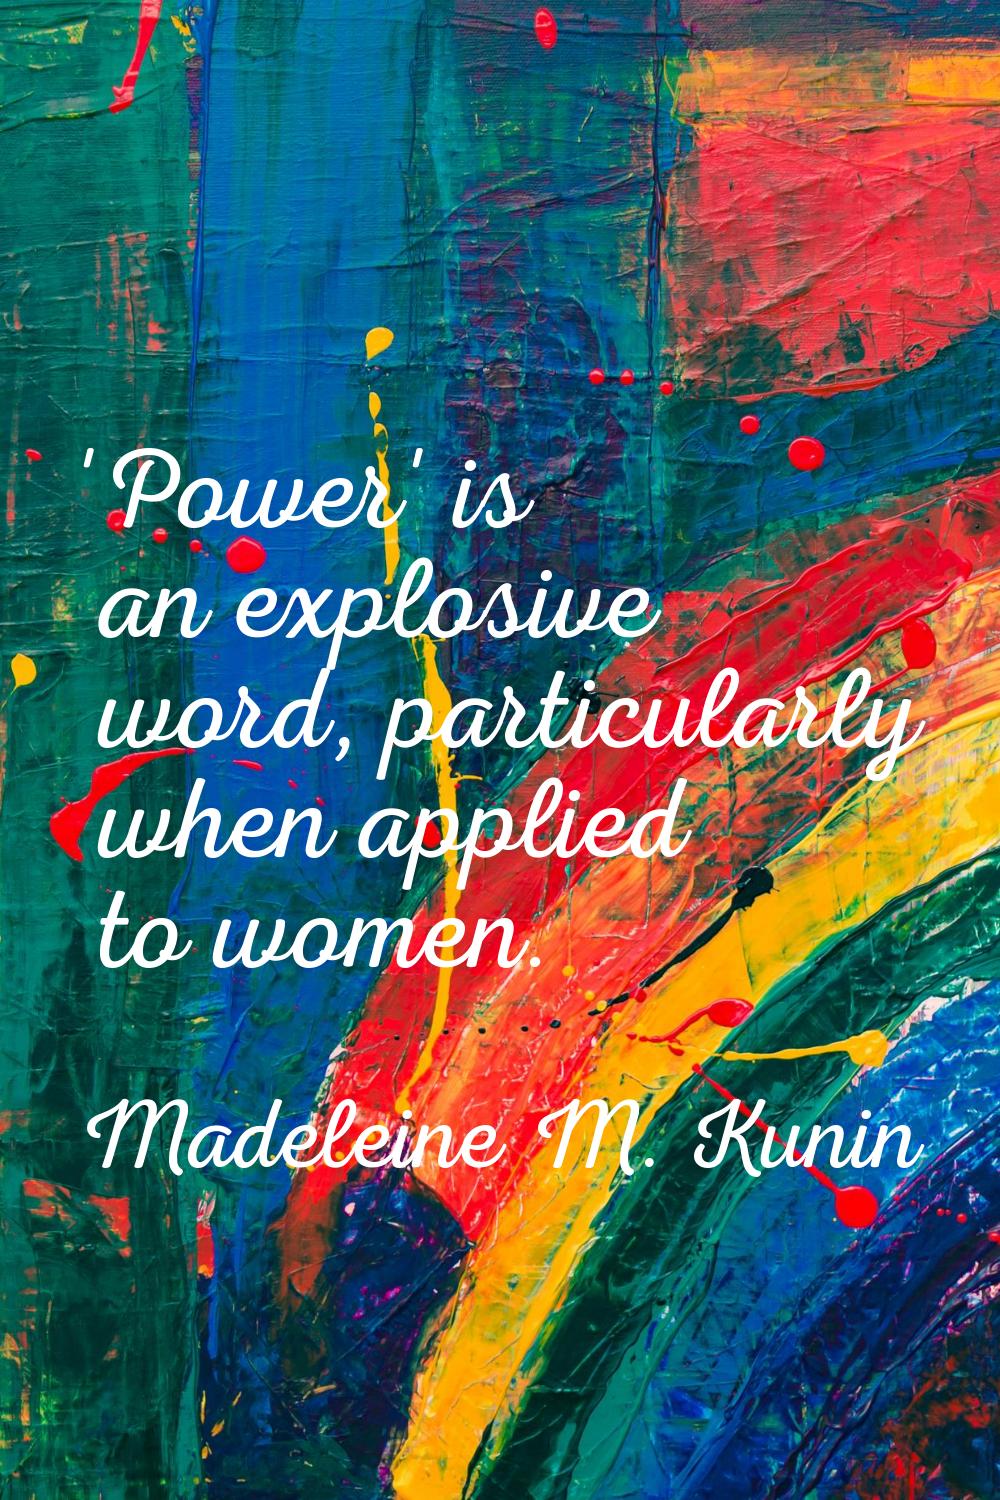 'Power' is an explosive word, particularly when applied to women.